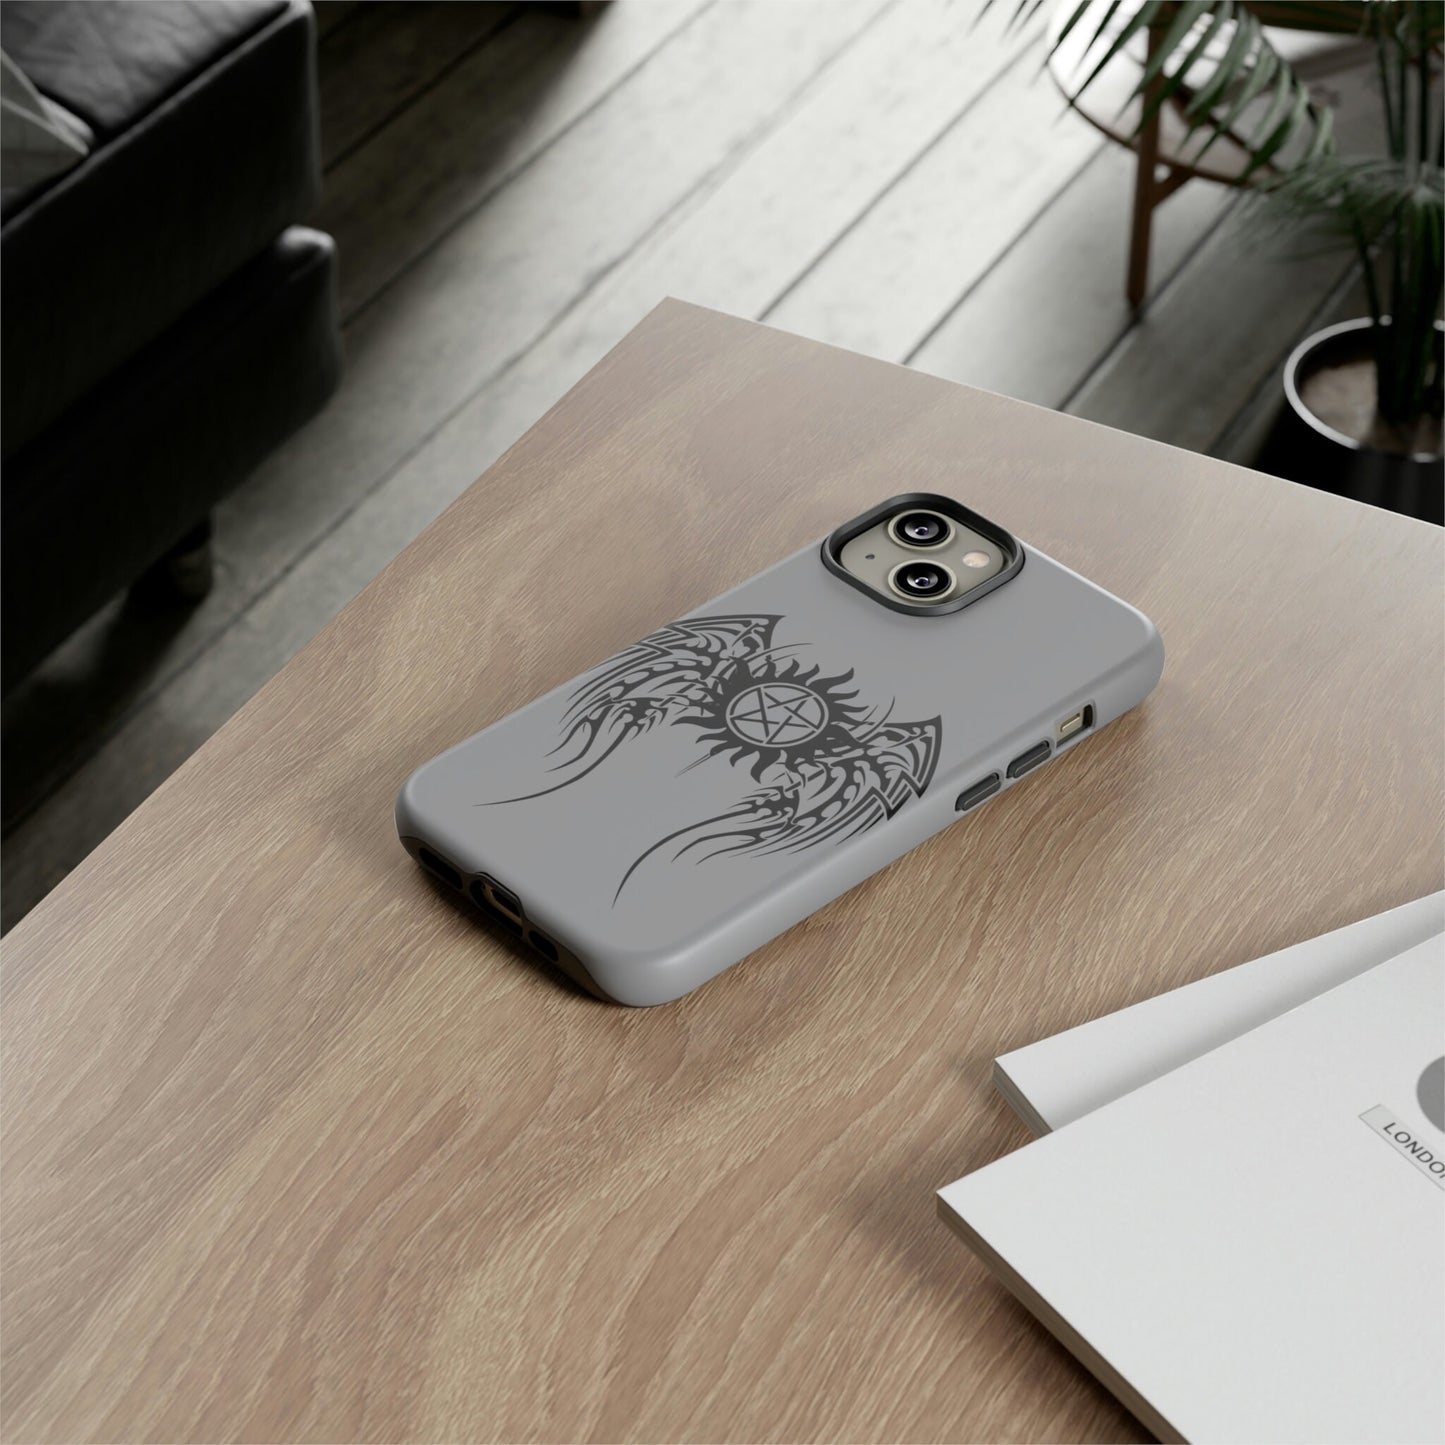 Supernatural Inspired Anti-Possession Cell Phone Case for iPhone, Samsung & Google